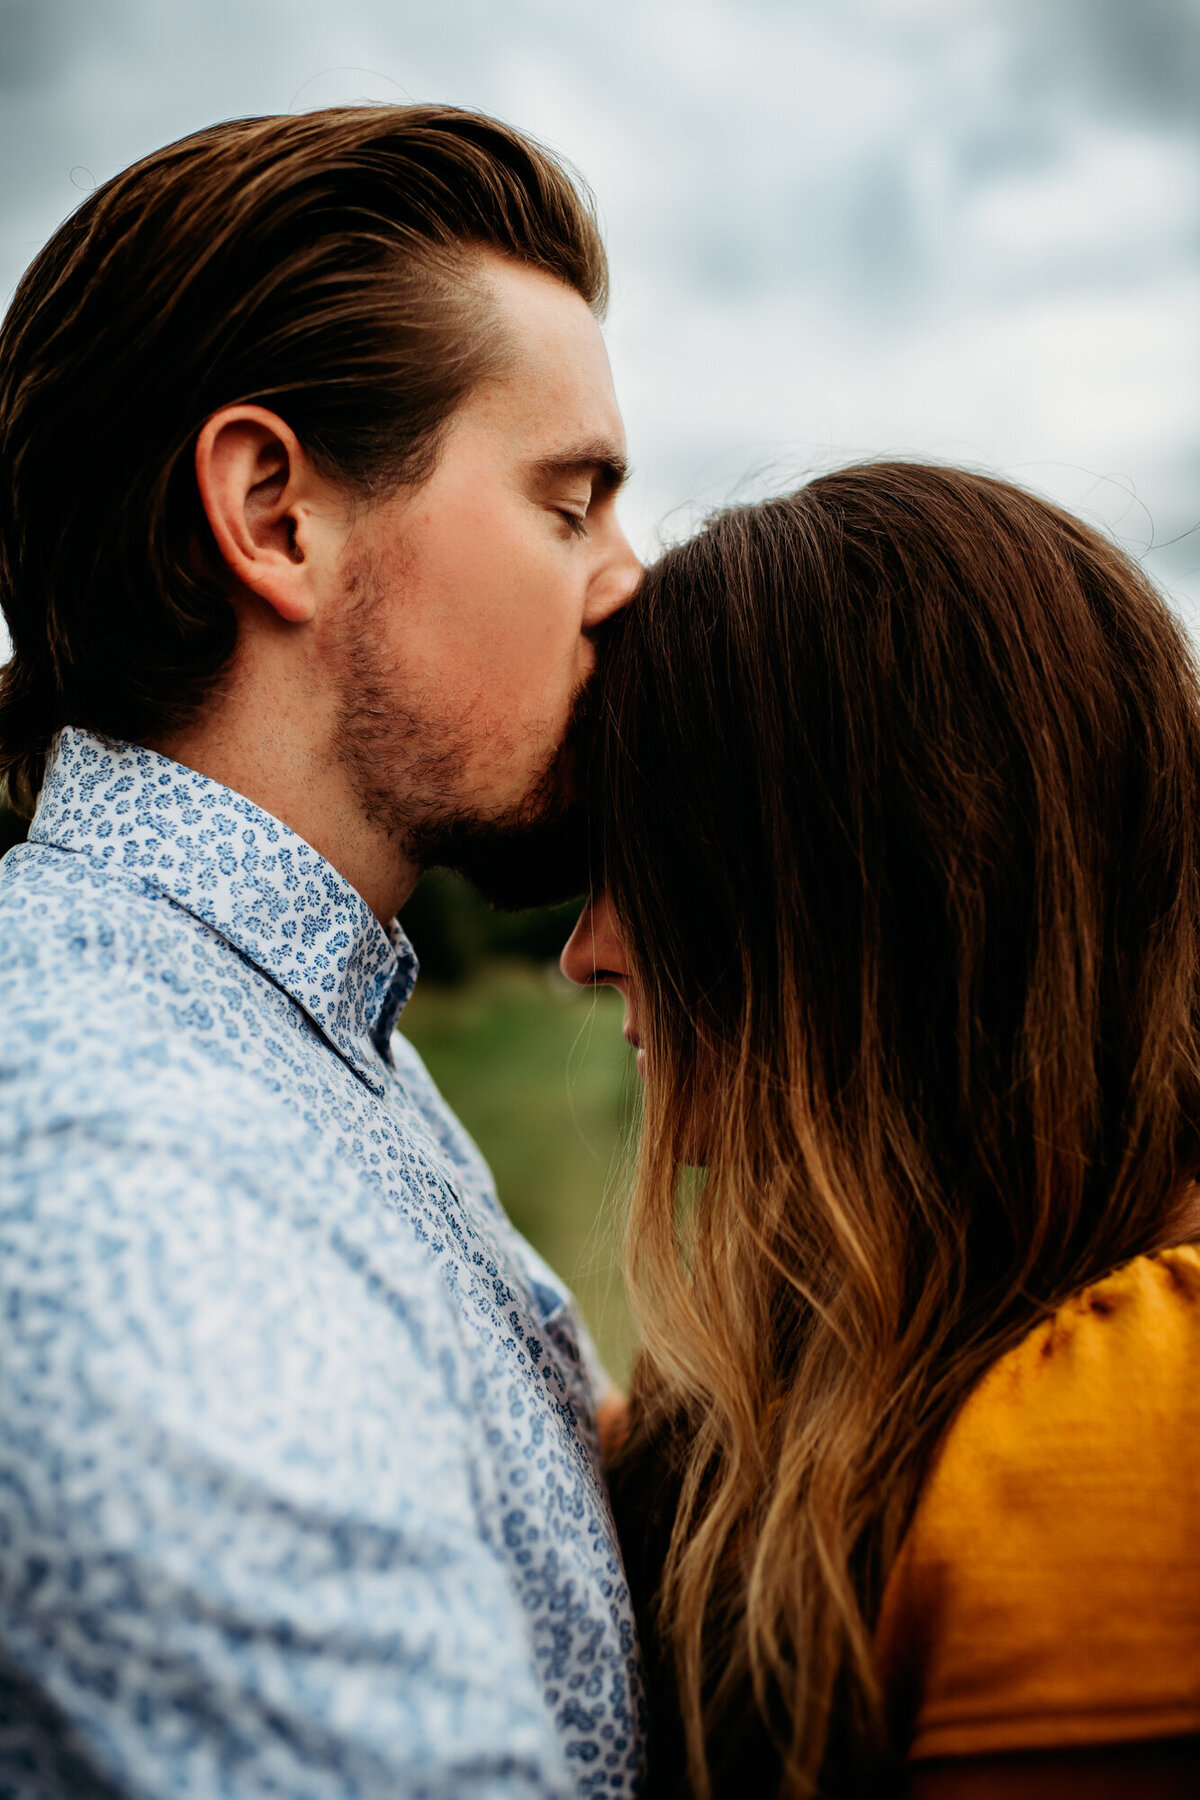 Couples Photography, man kisses woman on the forehead affectionately